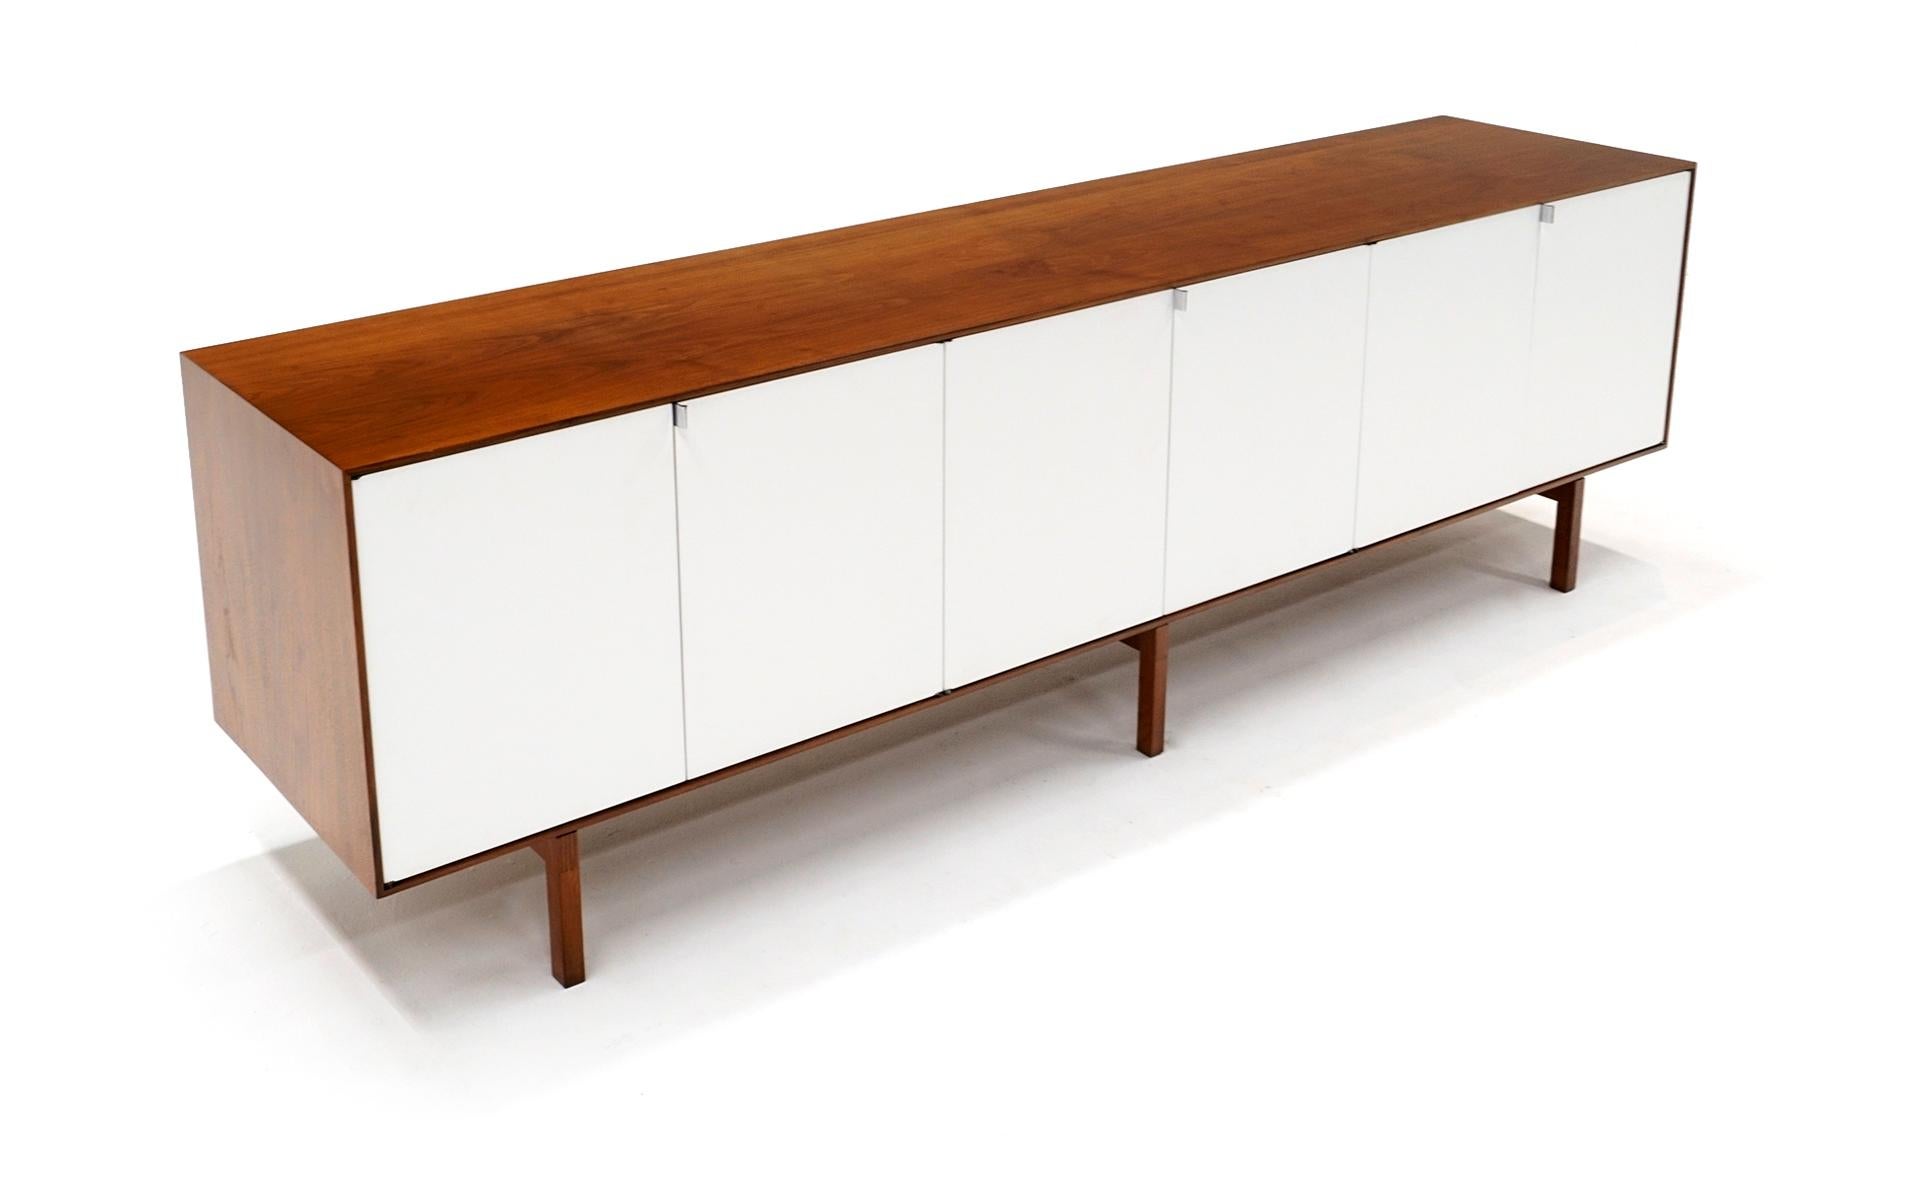 Very rare, likely customer ordered, Florence Knoll walnut and white six door credenza / storage cabinet / sideboard. Expertly restored and refinished, paying attention to every detail. All original hardware, shelves and drawers. Look at the detailed